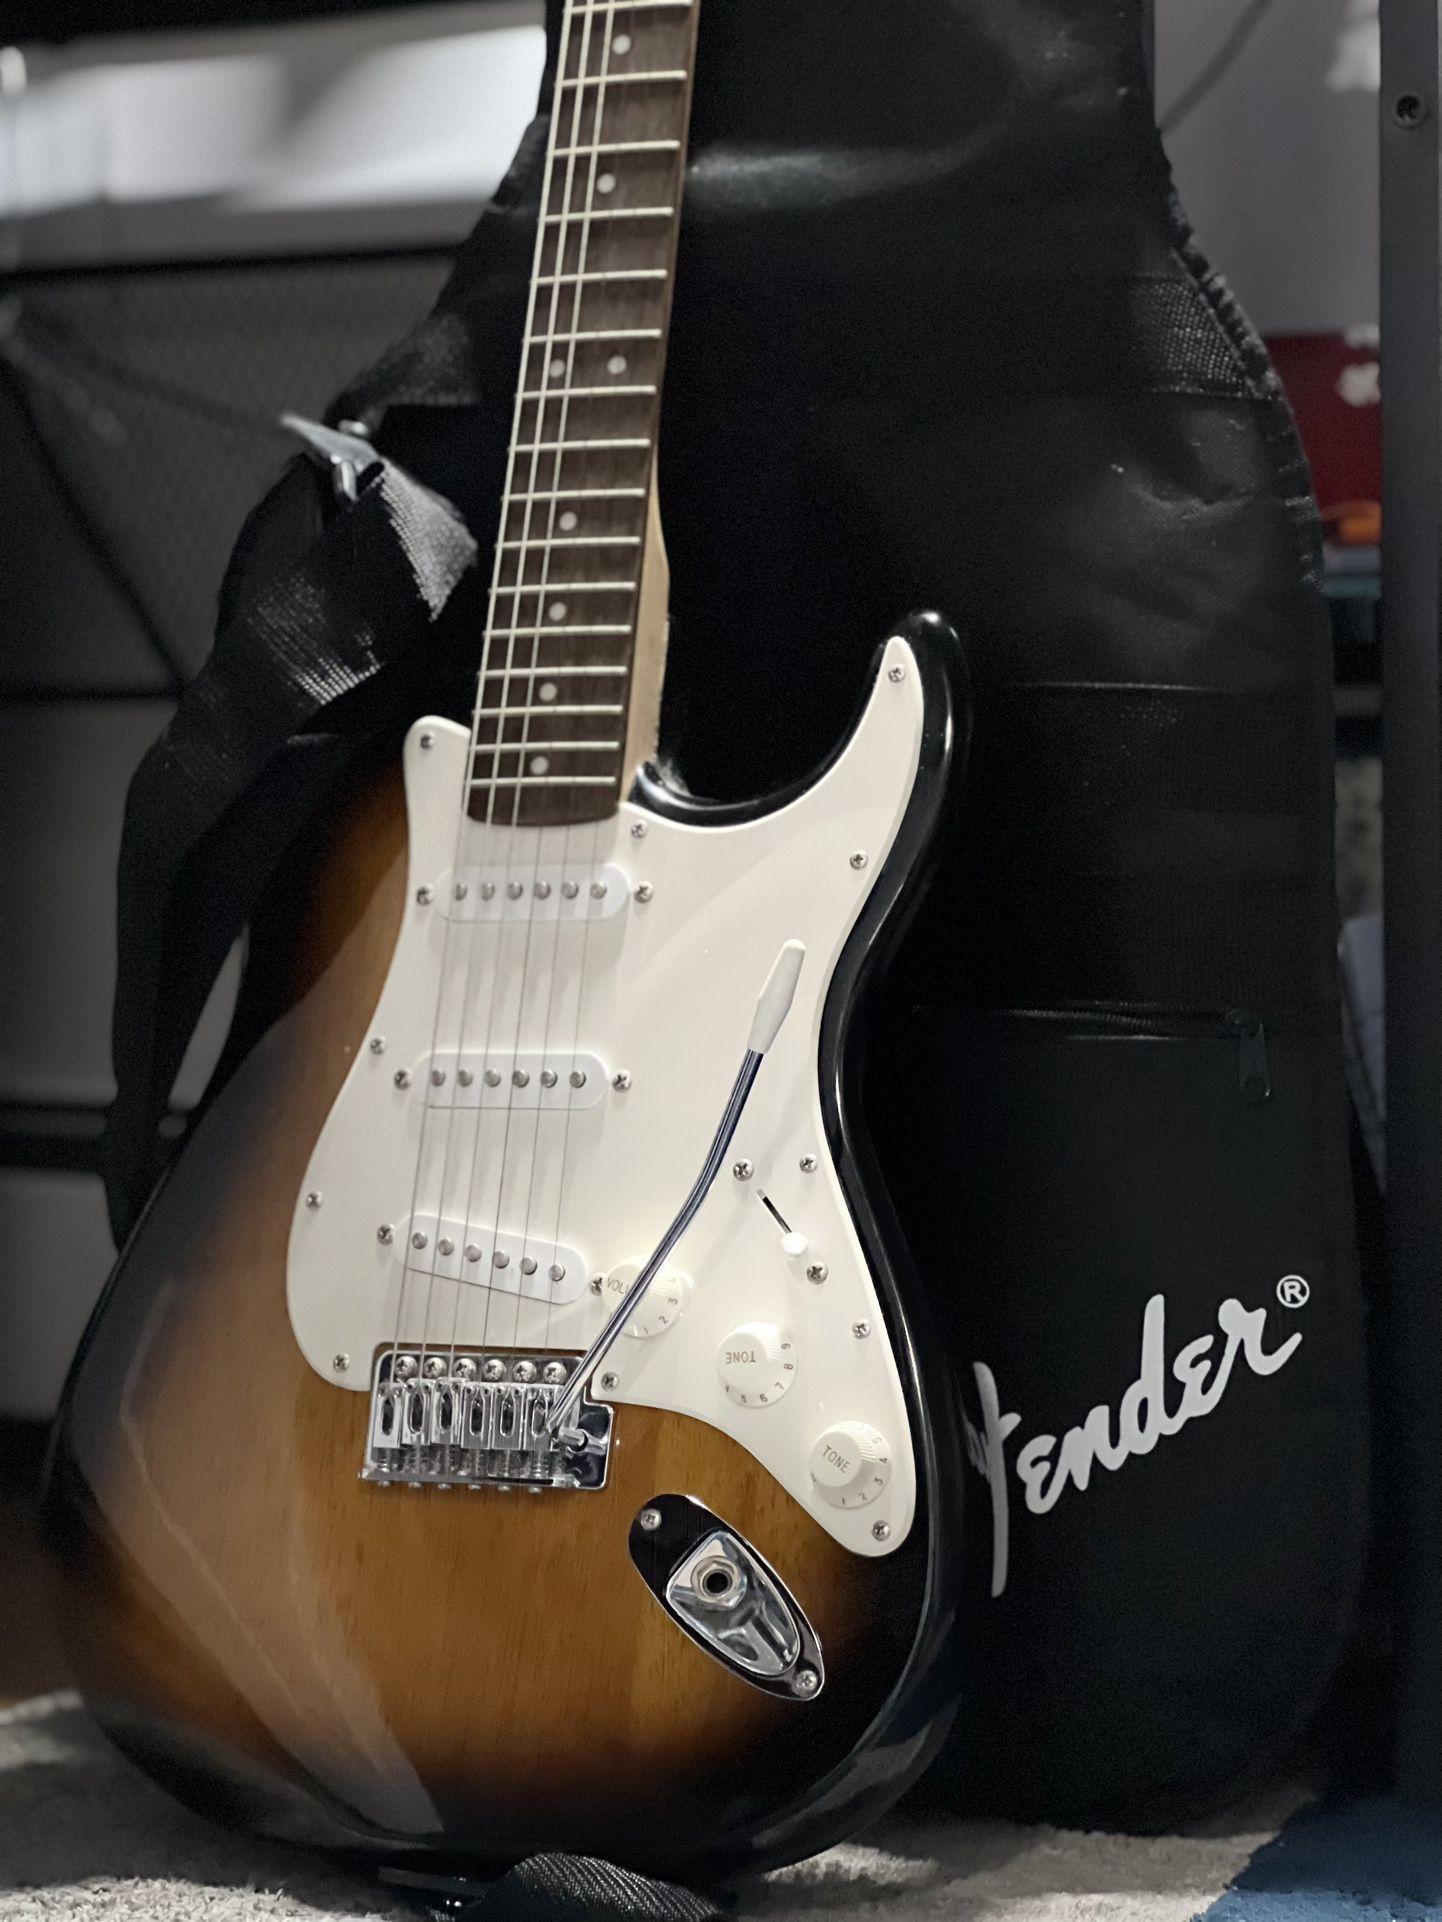 Squier Guitar by Fender Stratocaster